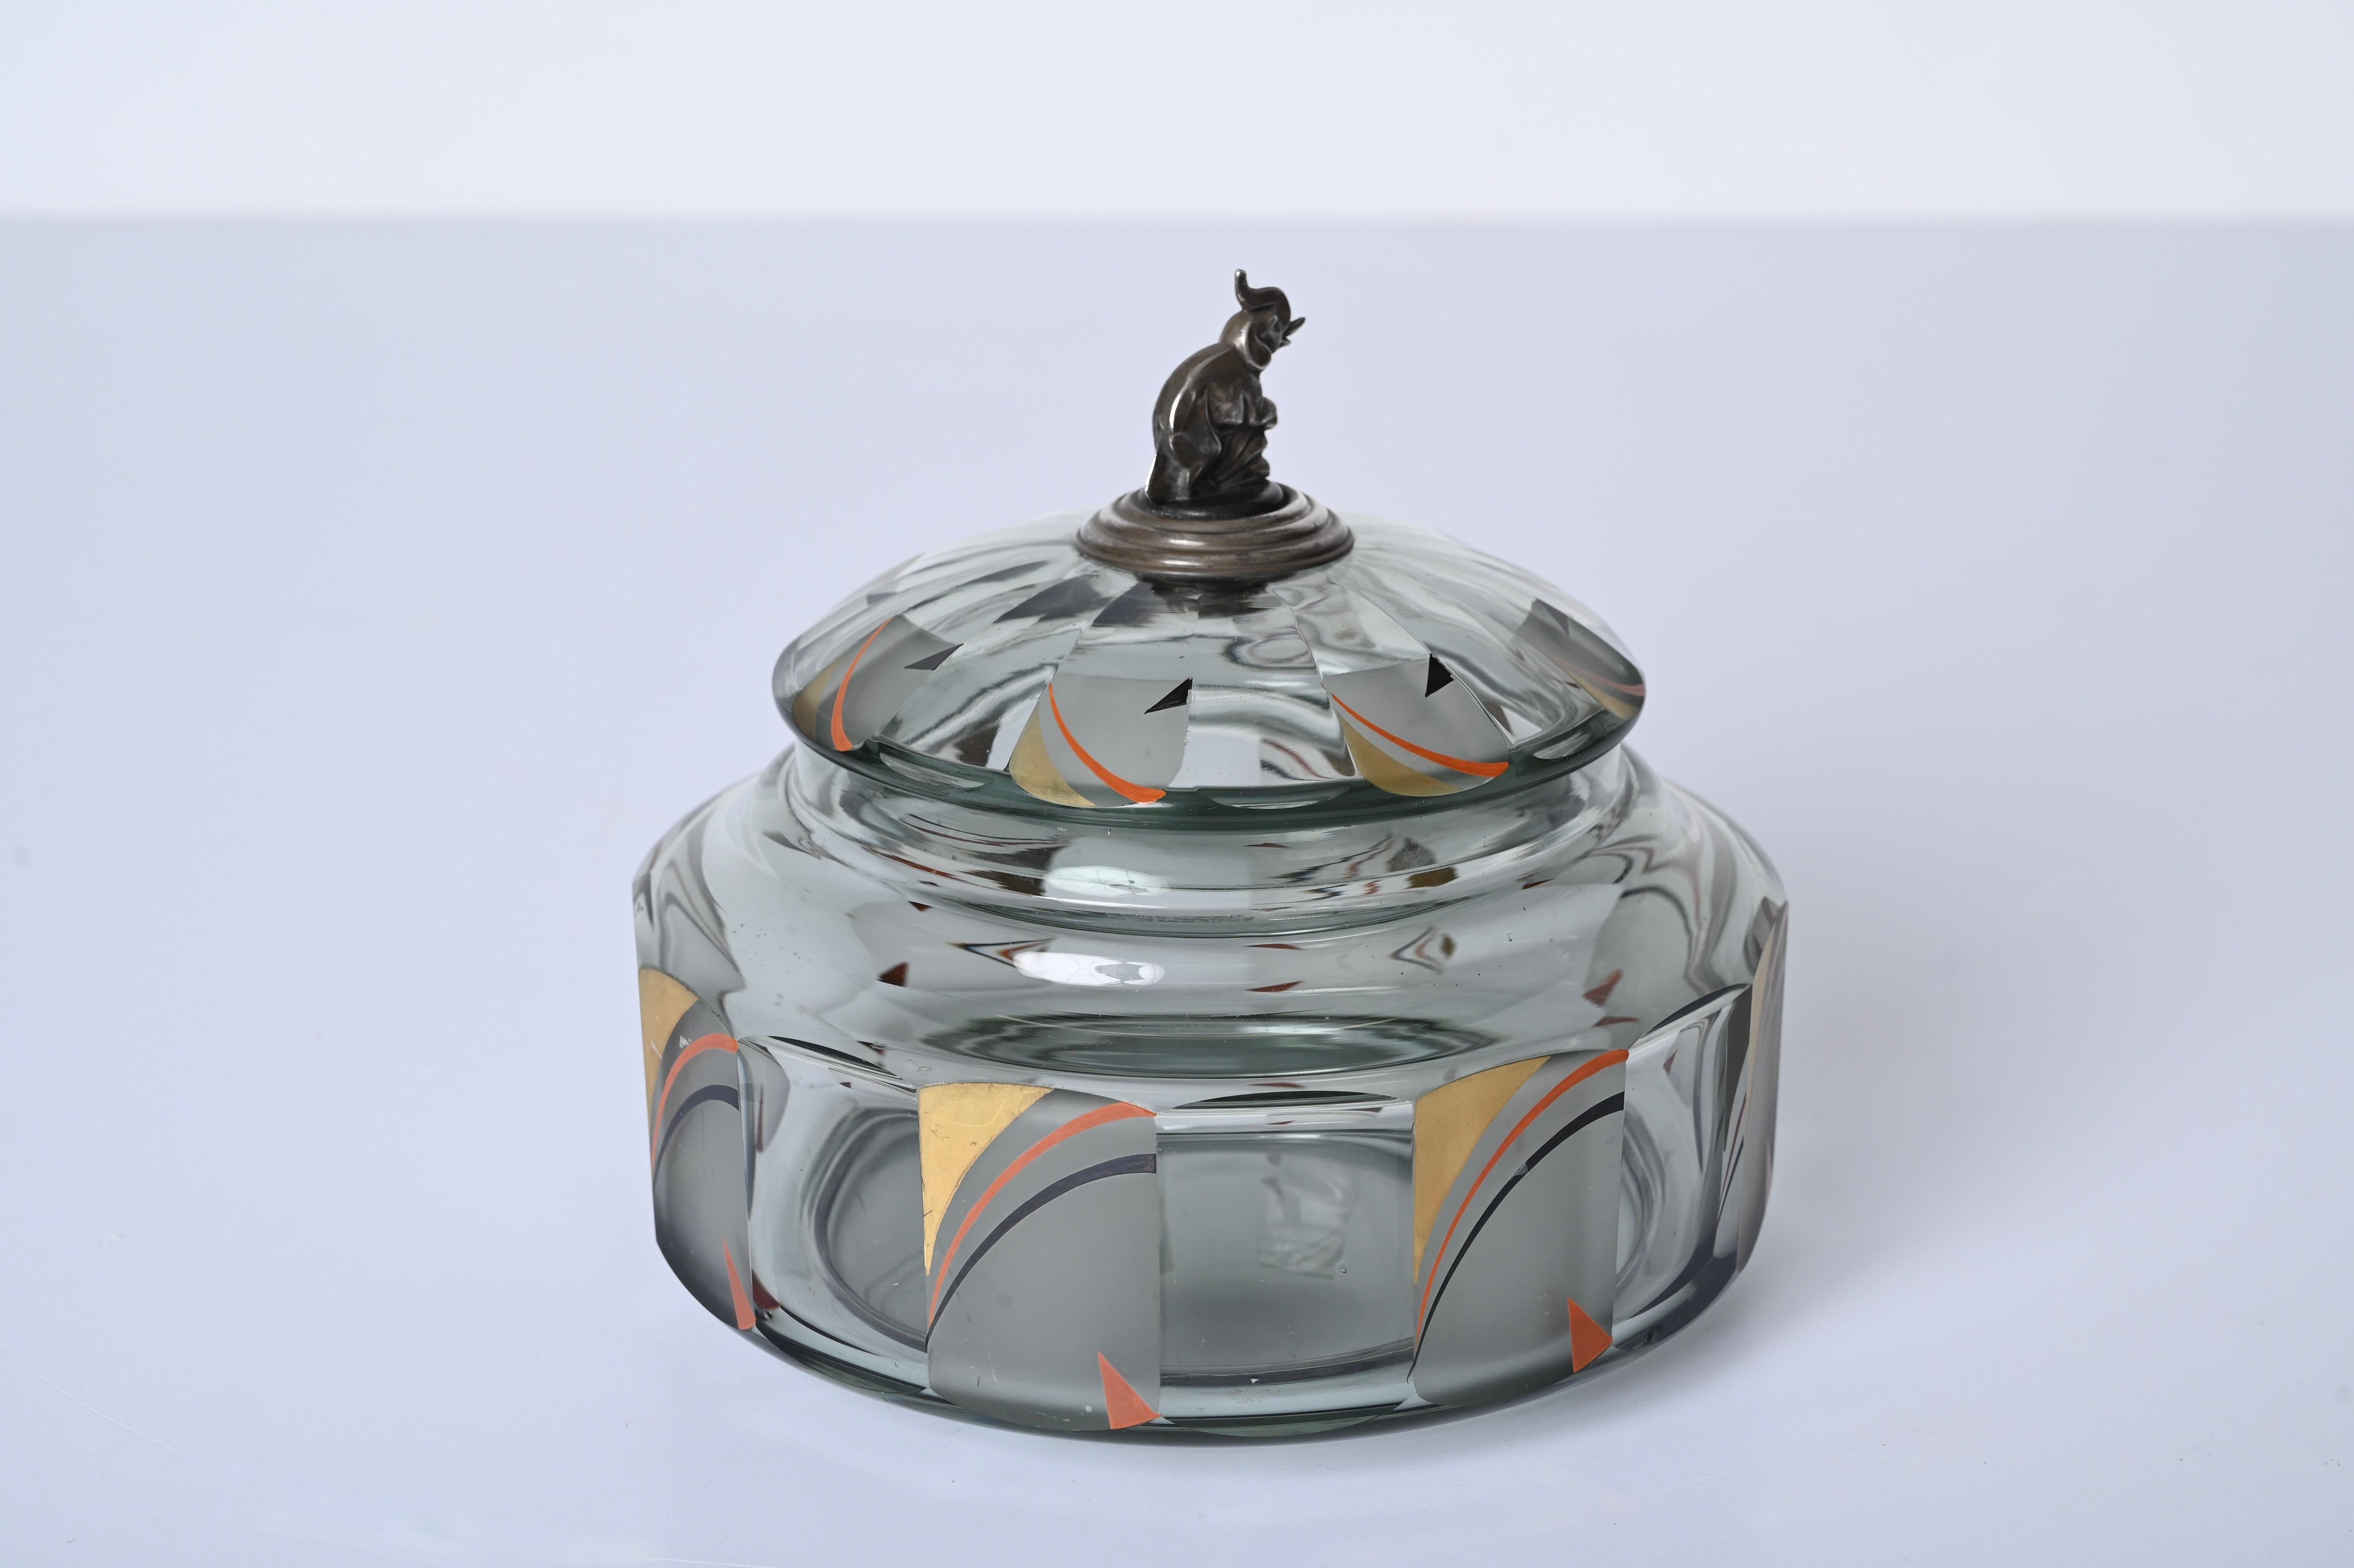 Italian Futurist Crystal Enameled Box with Silver Sculpture, Italy, 1933 For Sale 4